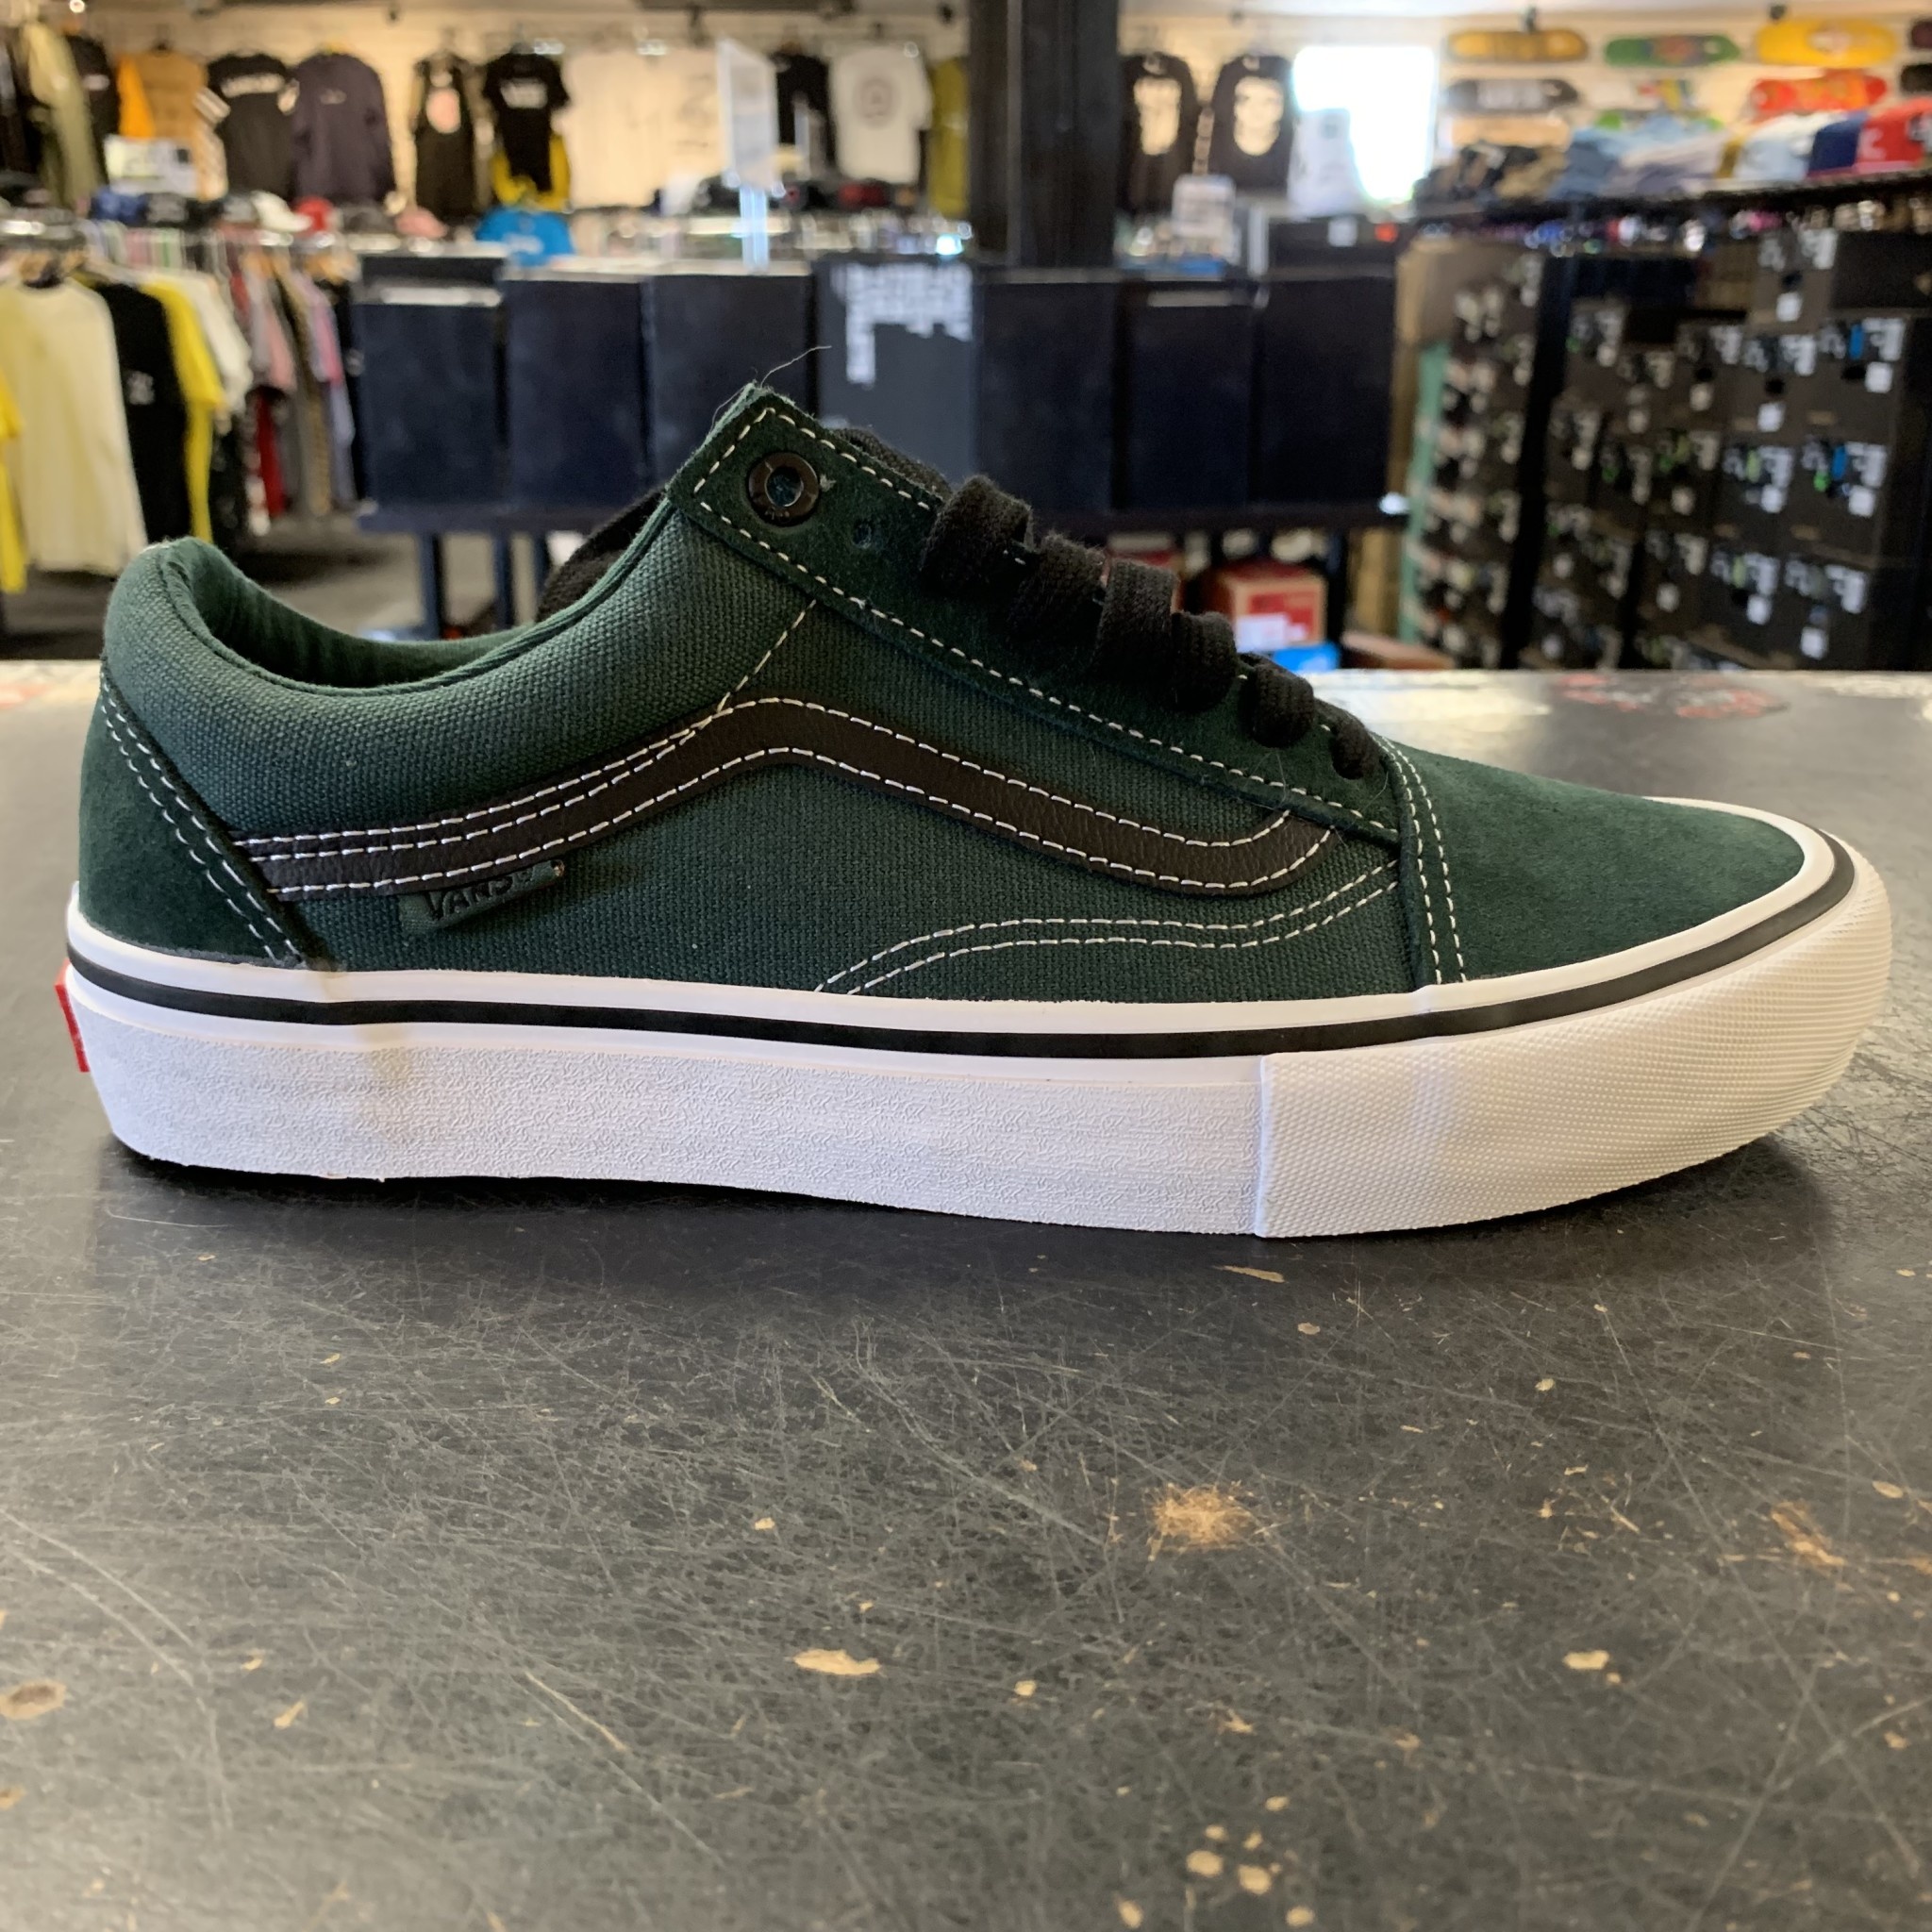 black and green vans shoes